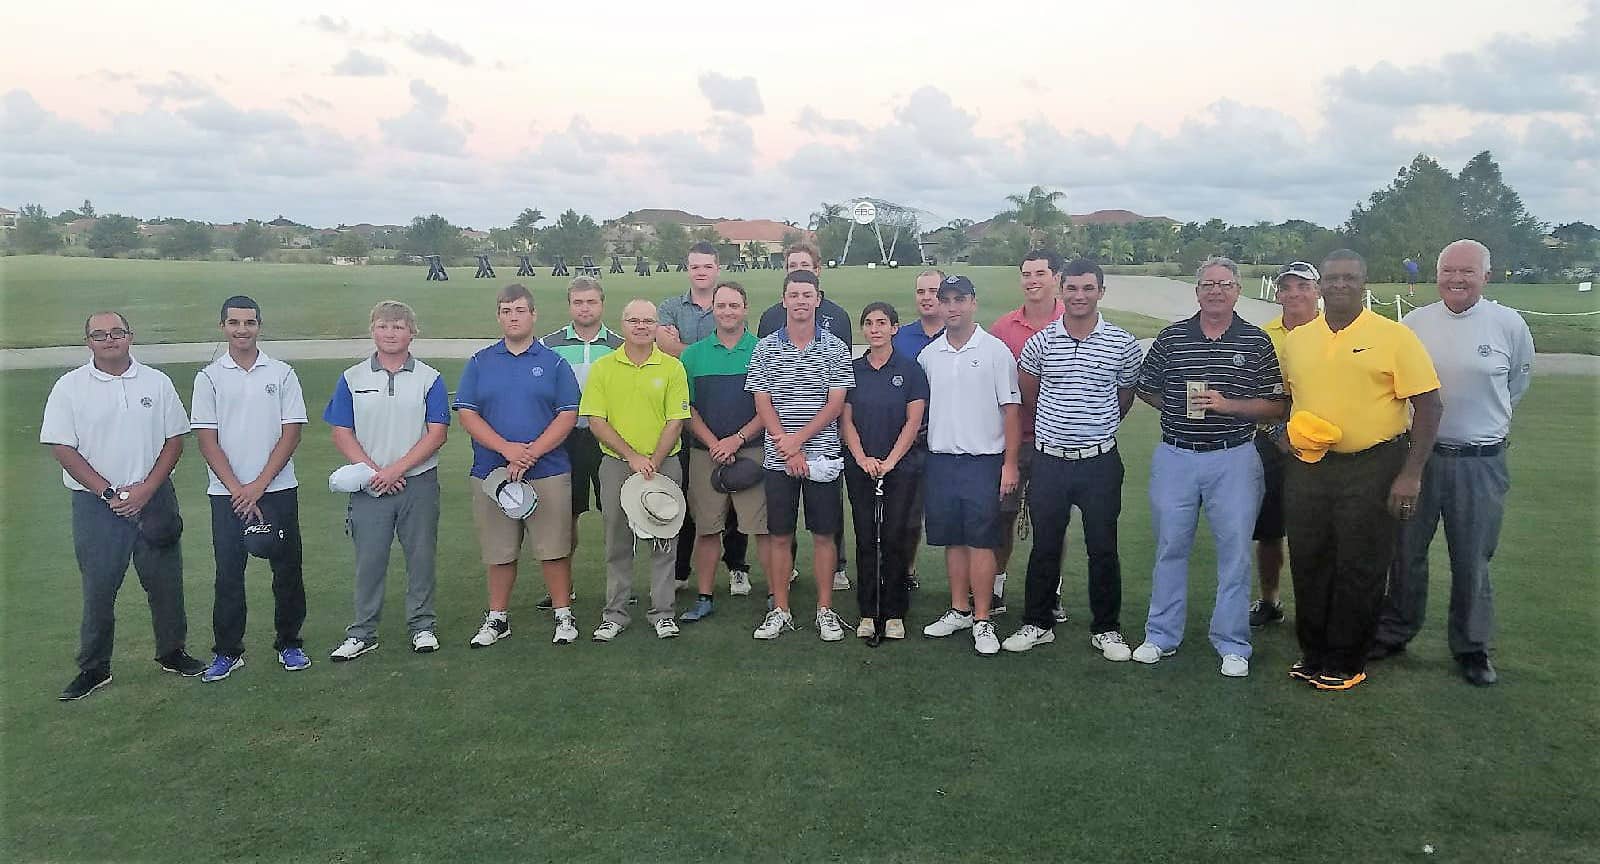 College of Golf Students Conduct Tournament to Benefit Cystic Fibrosis Foundation